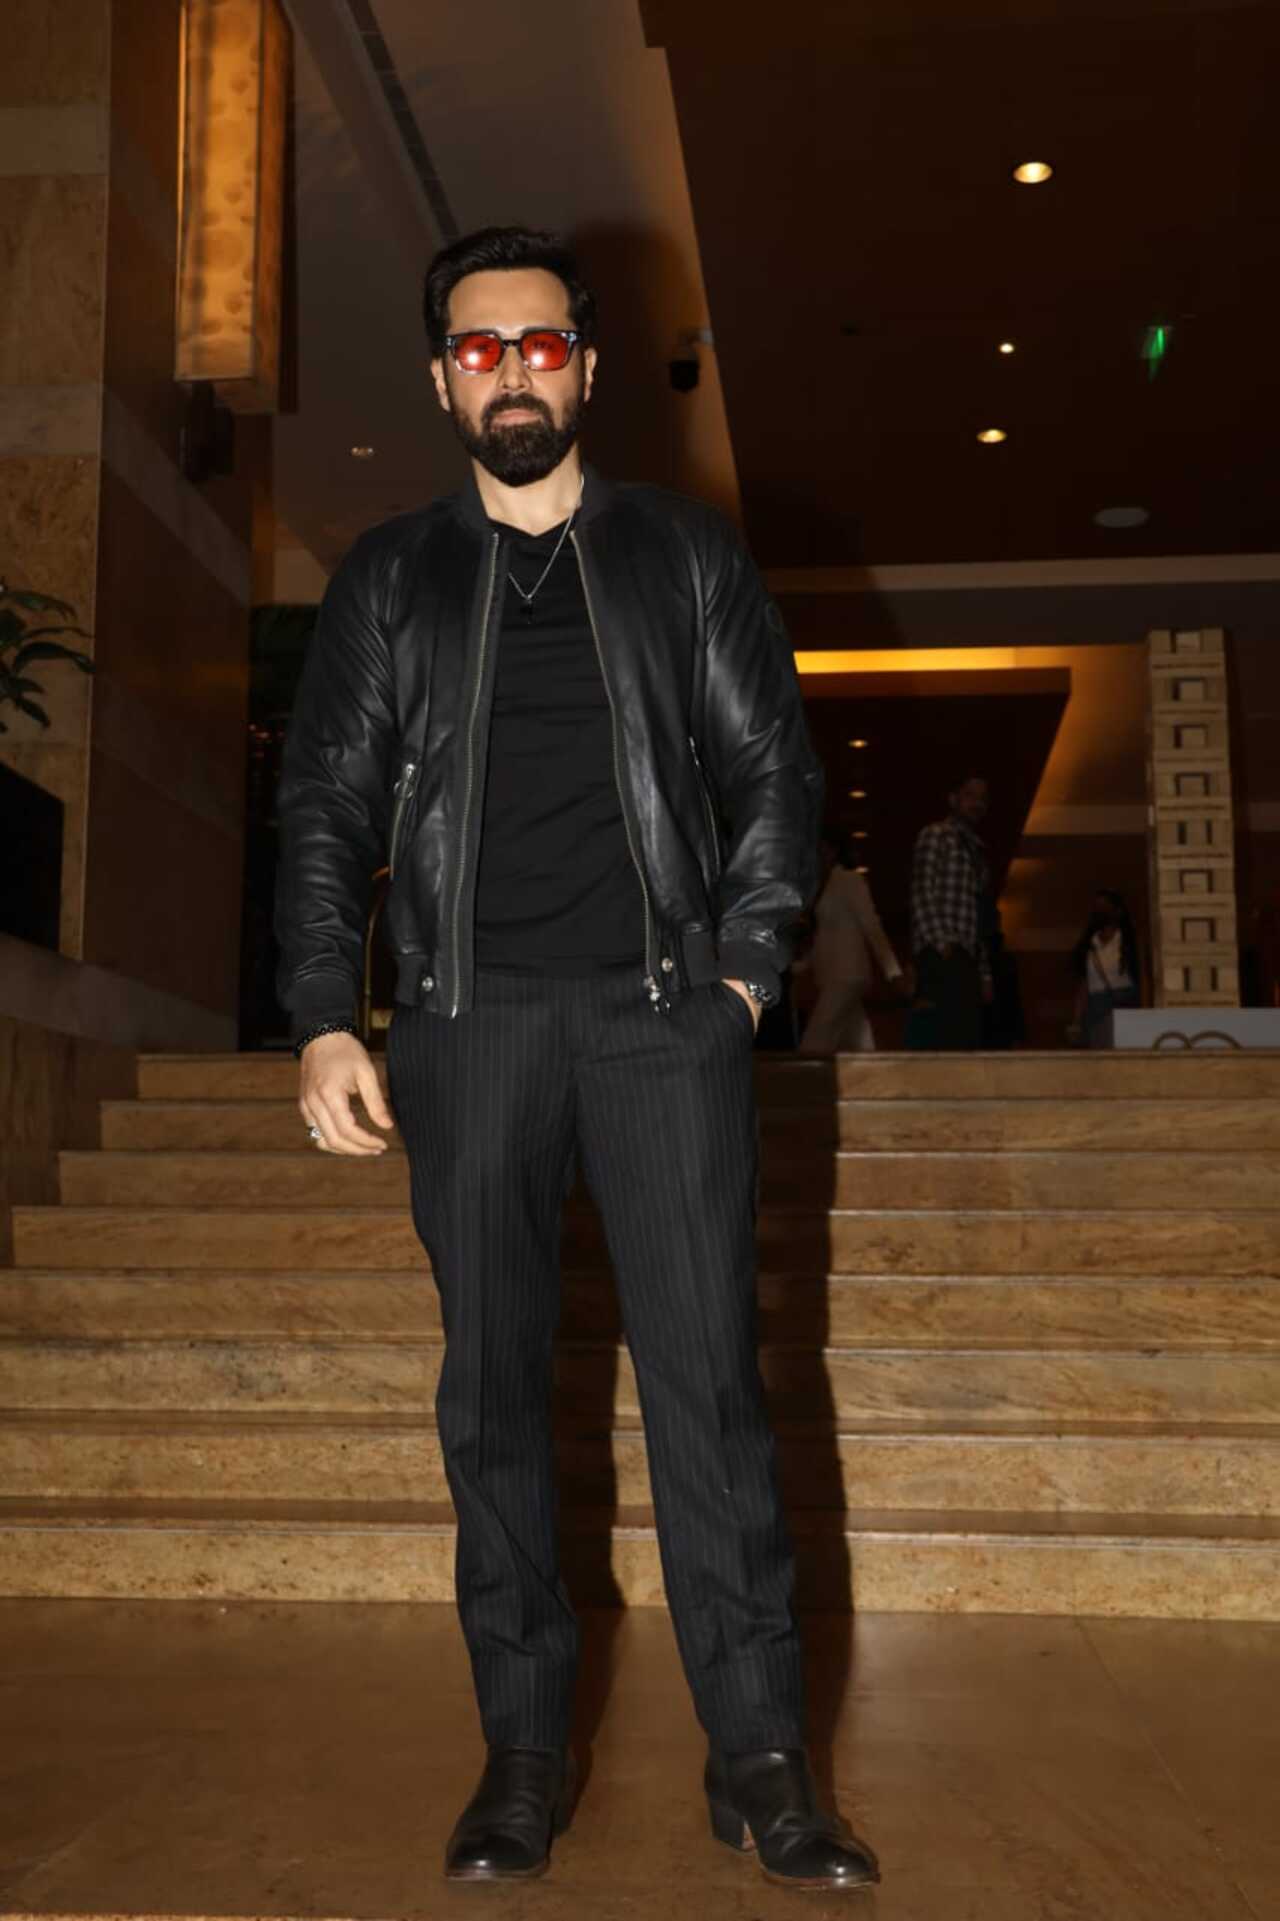 Emraan Hashmi was also spotted at Grand Hyatt in Mumbai for the Prime Video event